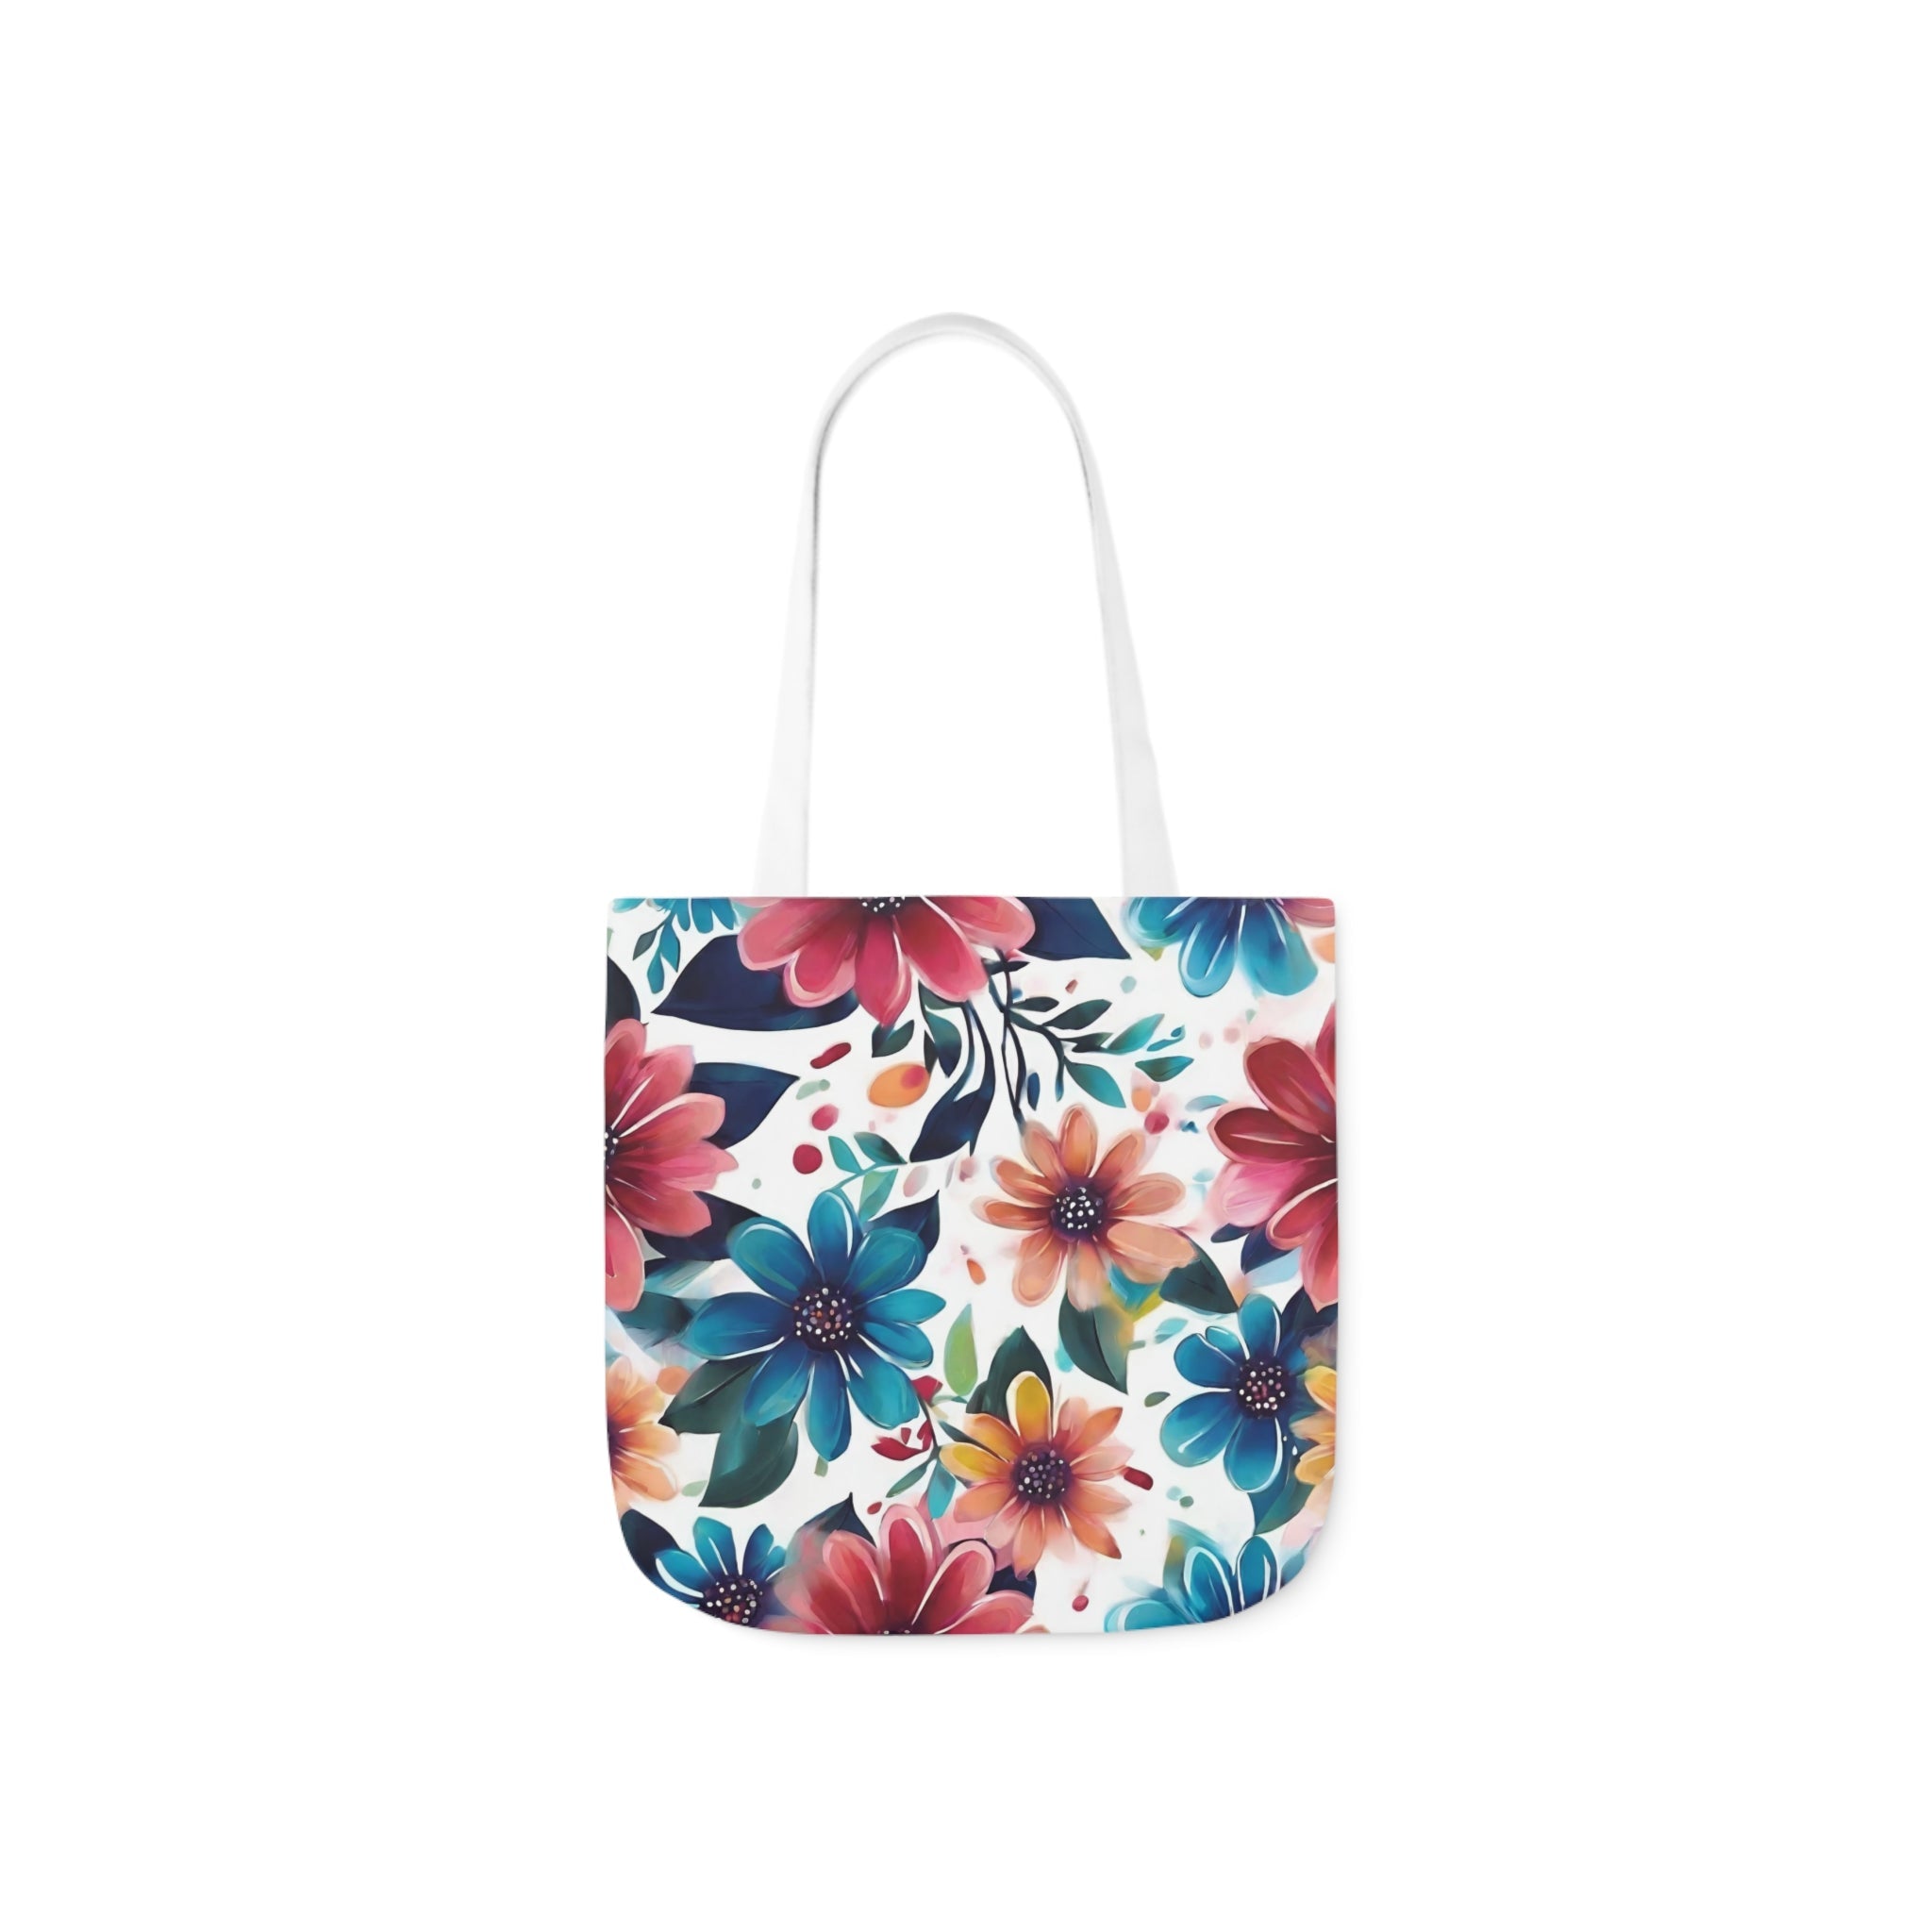 Chic floral tote bag with a colorful flower print design, perfect as a stylish summer accessory and an everyday vibrant carryall for fashion-forward individuals.